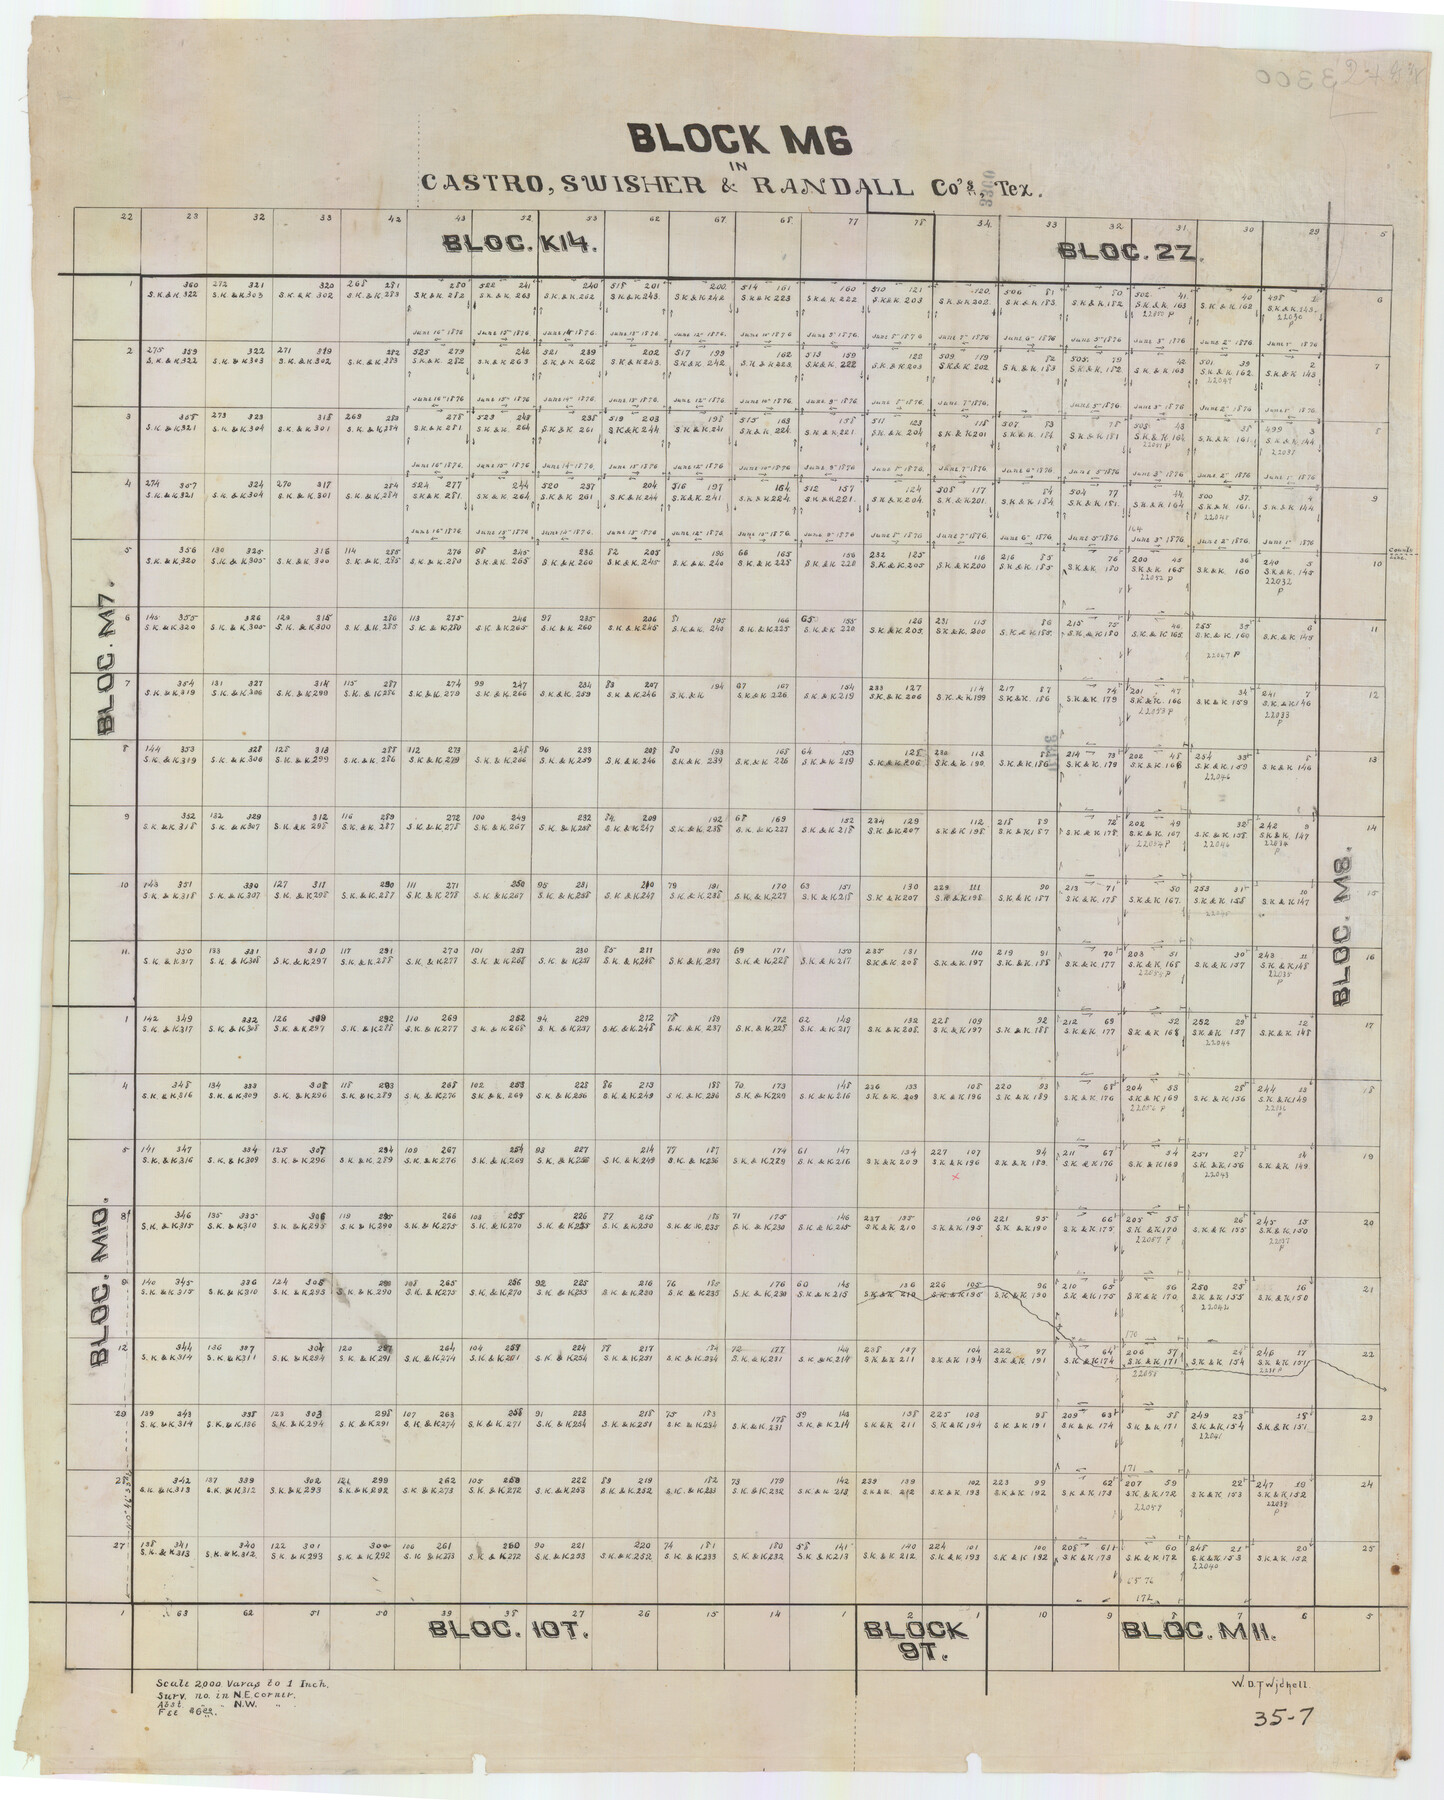 90397, Block M6 in Castro, Swisher, and Randall Co's, Tex., Twichell Survey Records